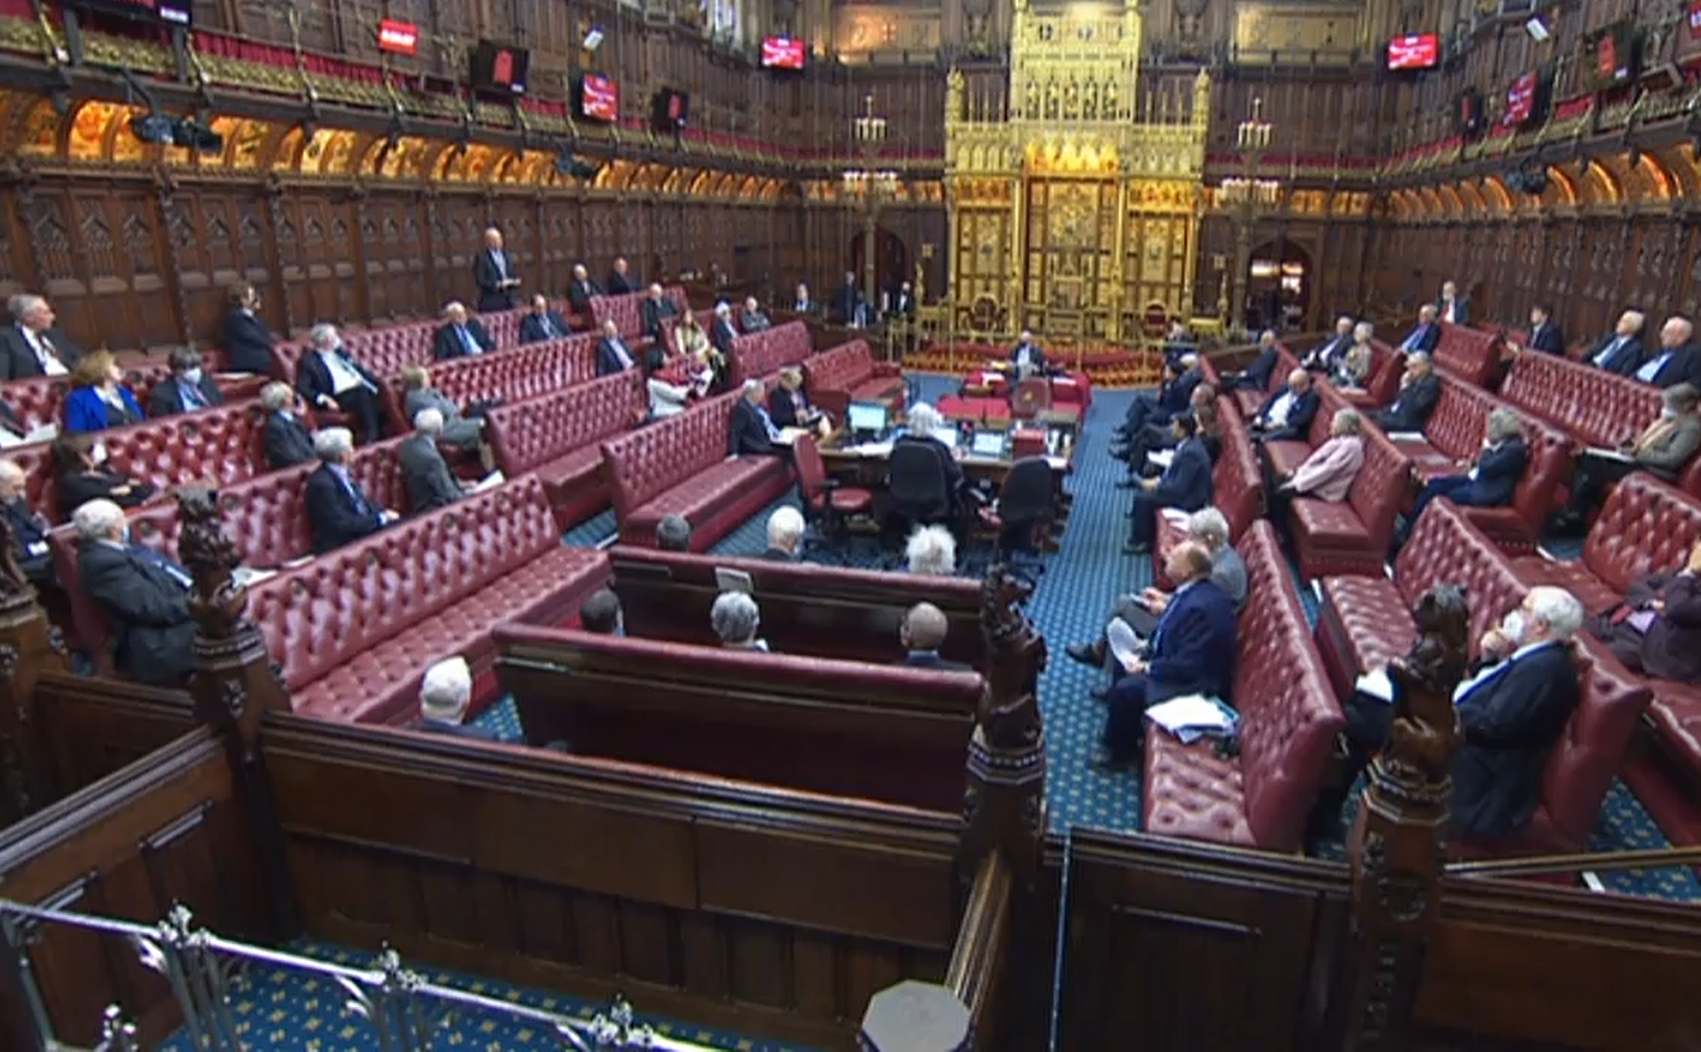 Peers must not ’accept any financial inducement’ in return for ‘exercising parliamentary influence‘